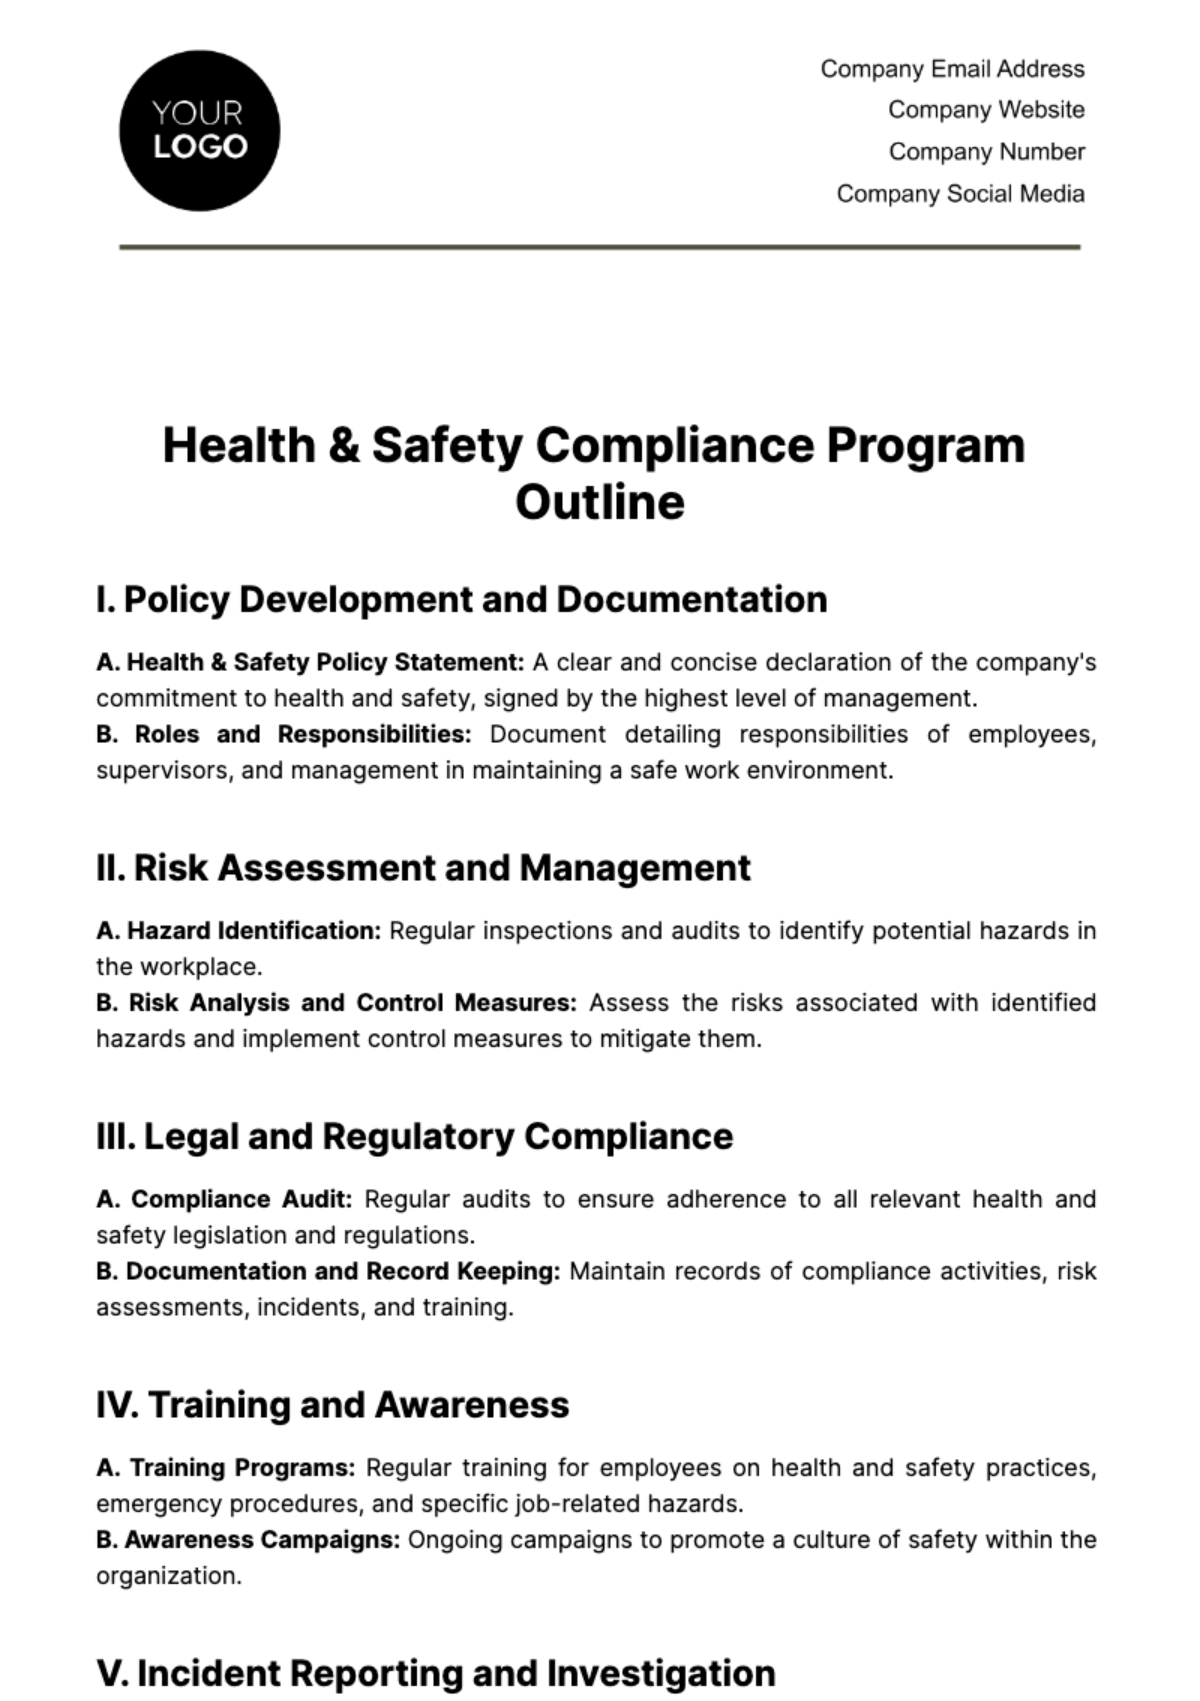 Health & Safety Compliance Program Outline Template